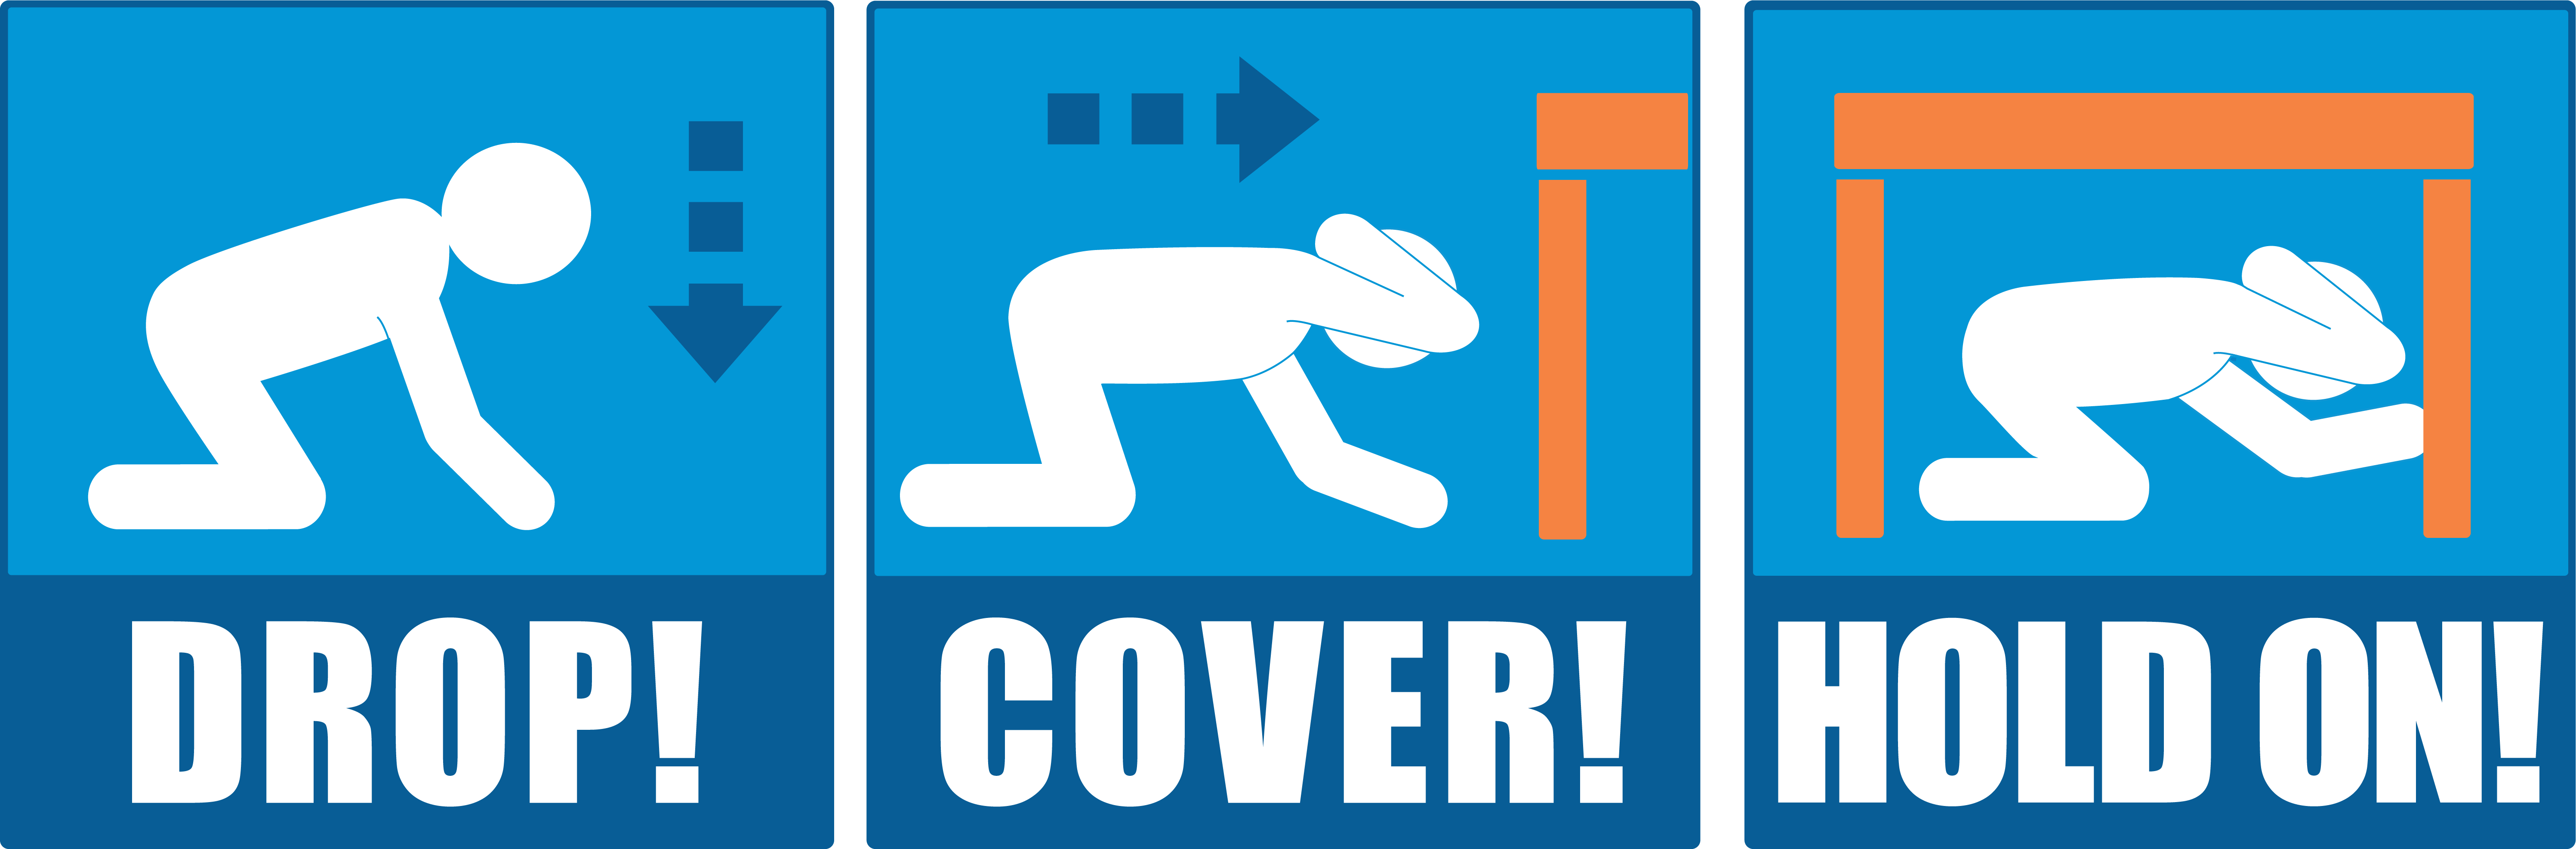 earthquake clipart unlikely